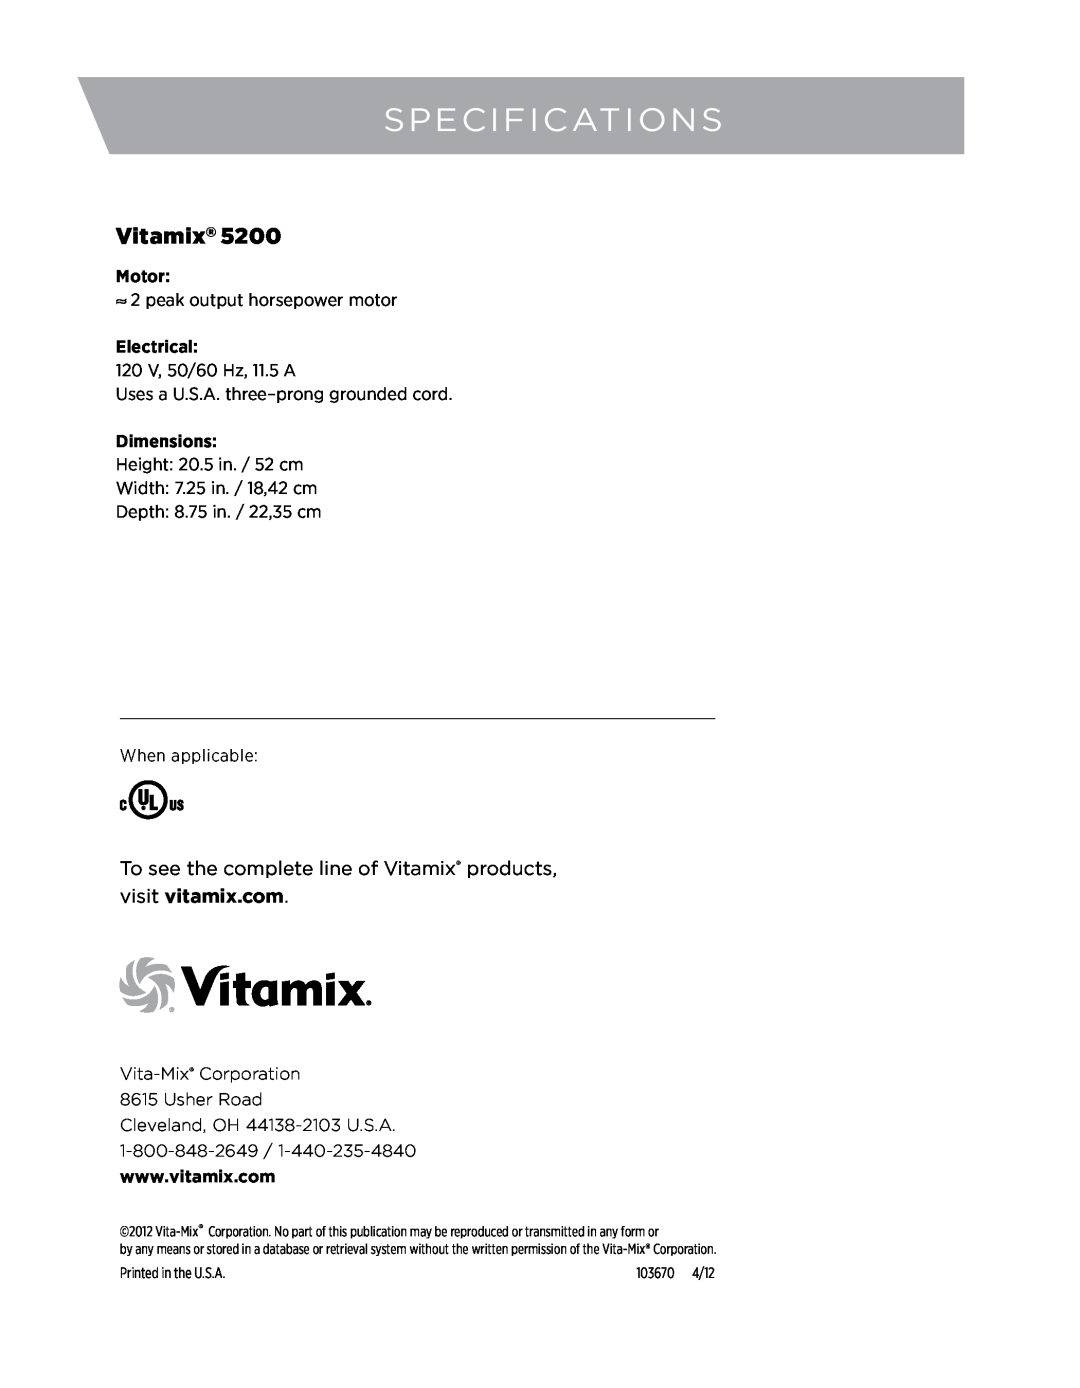 Vita-Mix 5200 specifications, To see the complete line of Vitamix products, visit vitamix.com, Motor, Electrical 